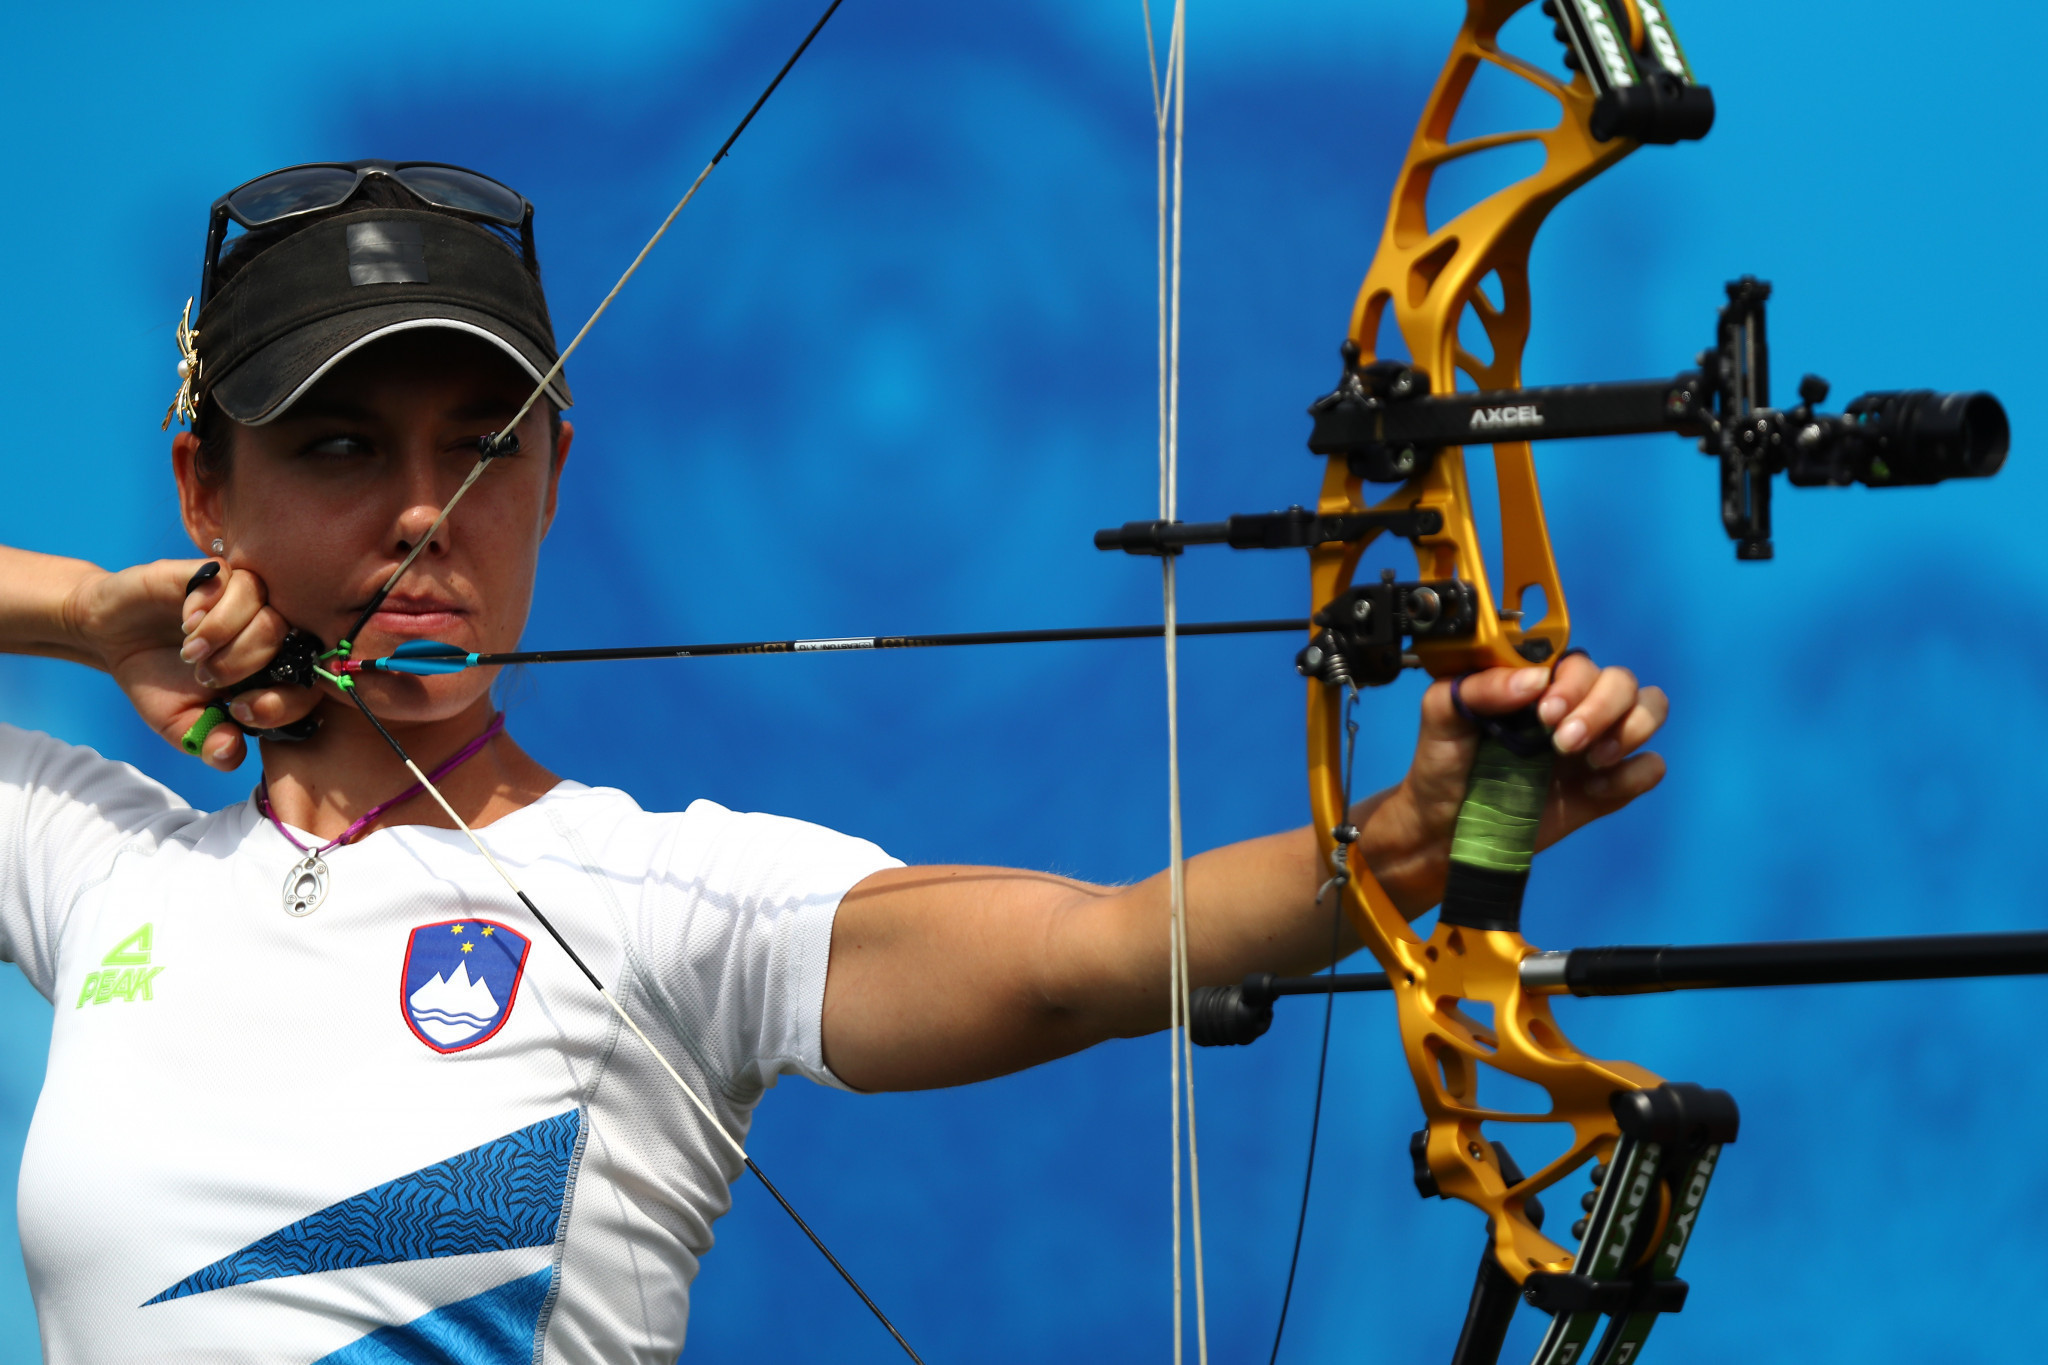 Slovenia's Toja Ellison triumphed as the eighth seed in the women's compound event at the Indoor Archery World Series finale ©Getty Images